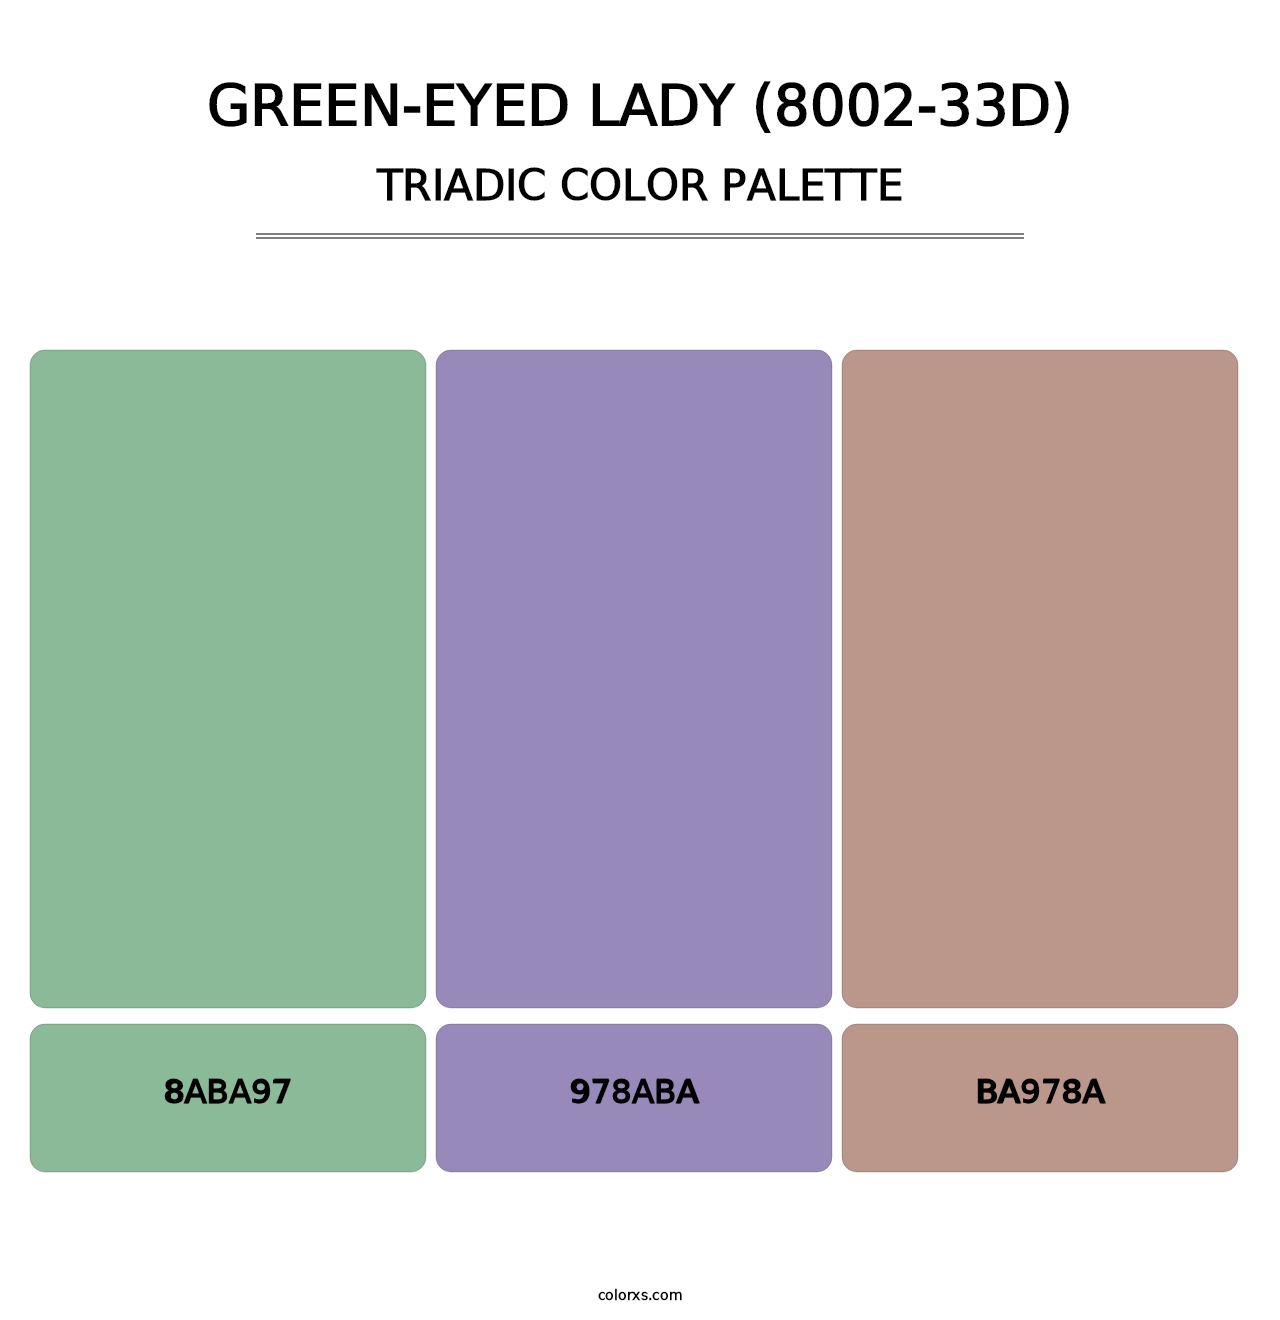 Green-Eyed Lady (8002-33D) - Triadic Color Palette